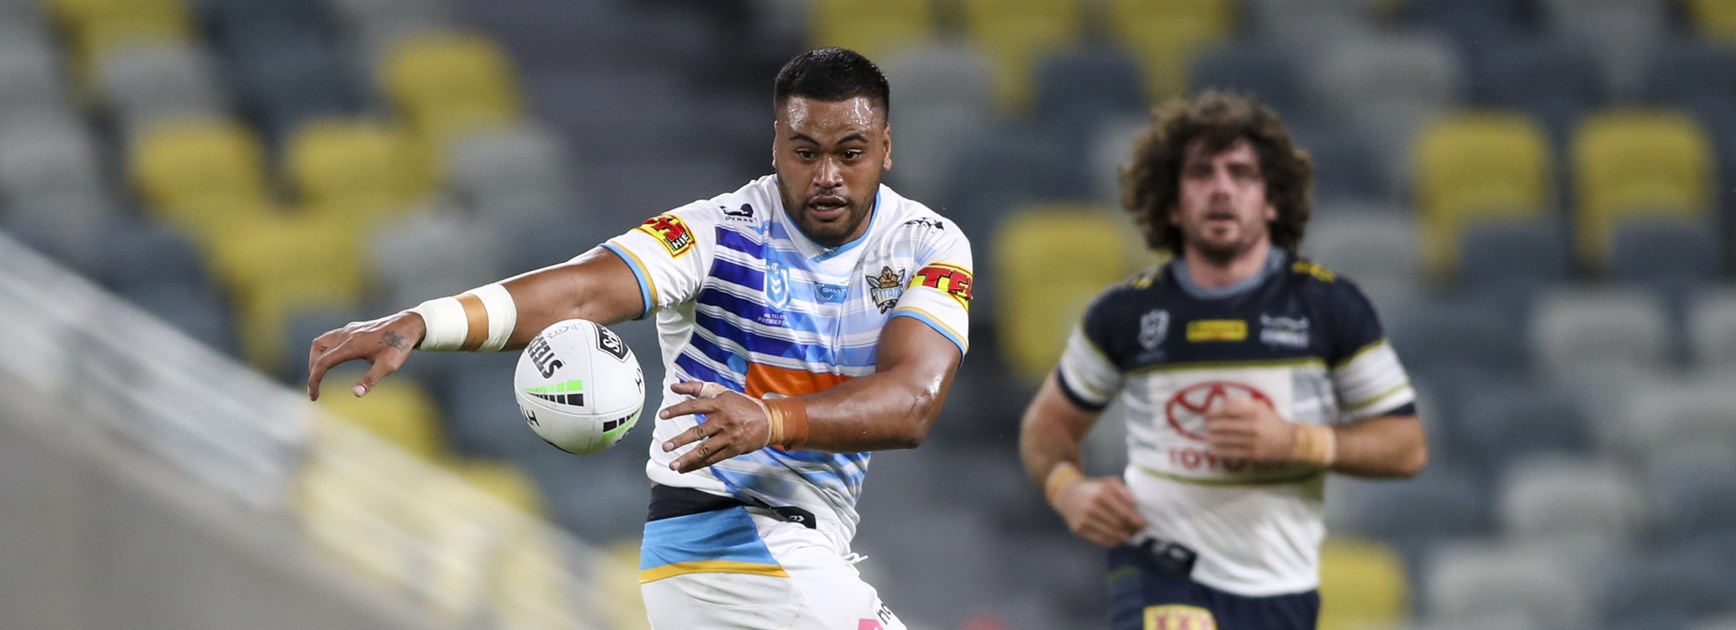 Cowboys Too Tough For Titans In Townsville